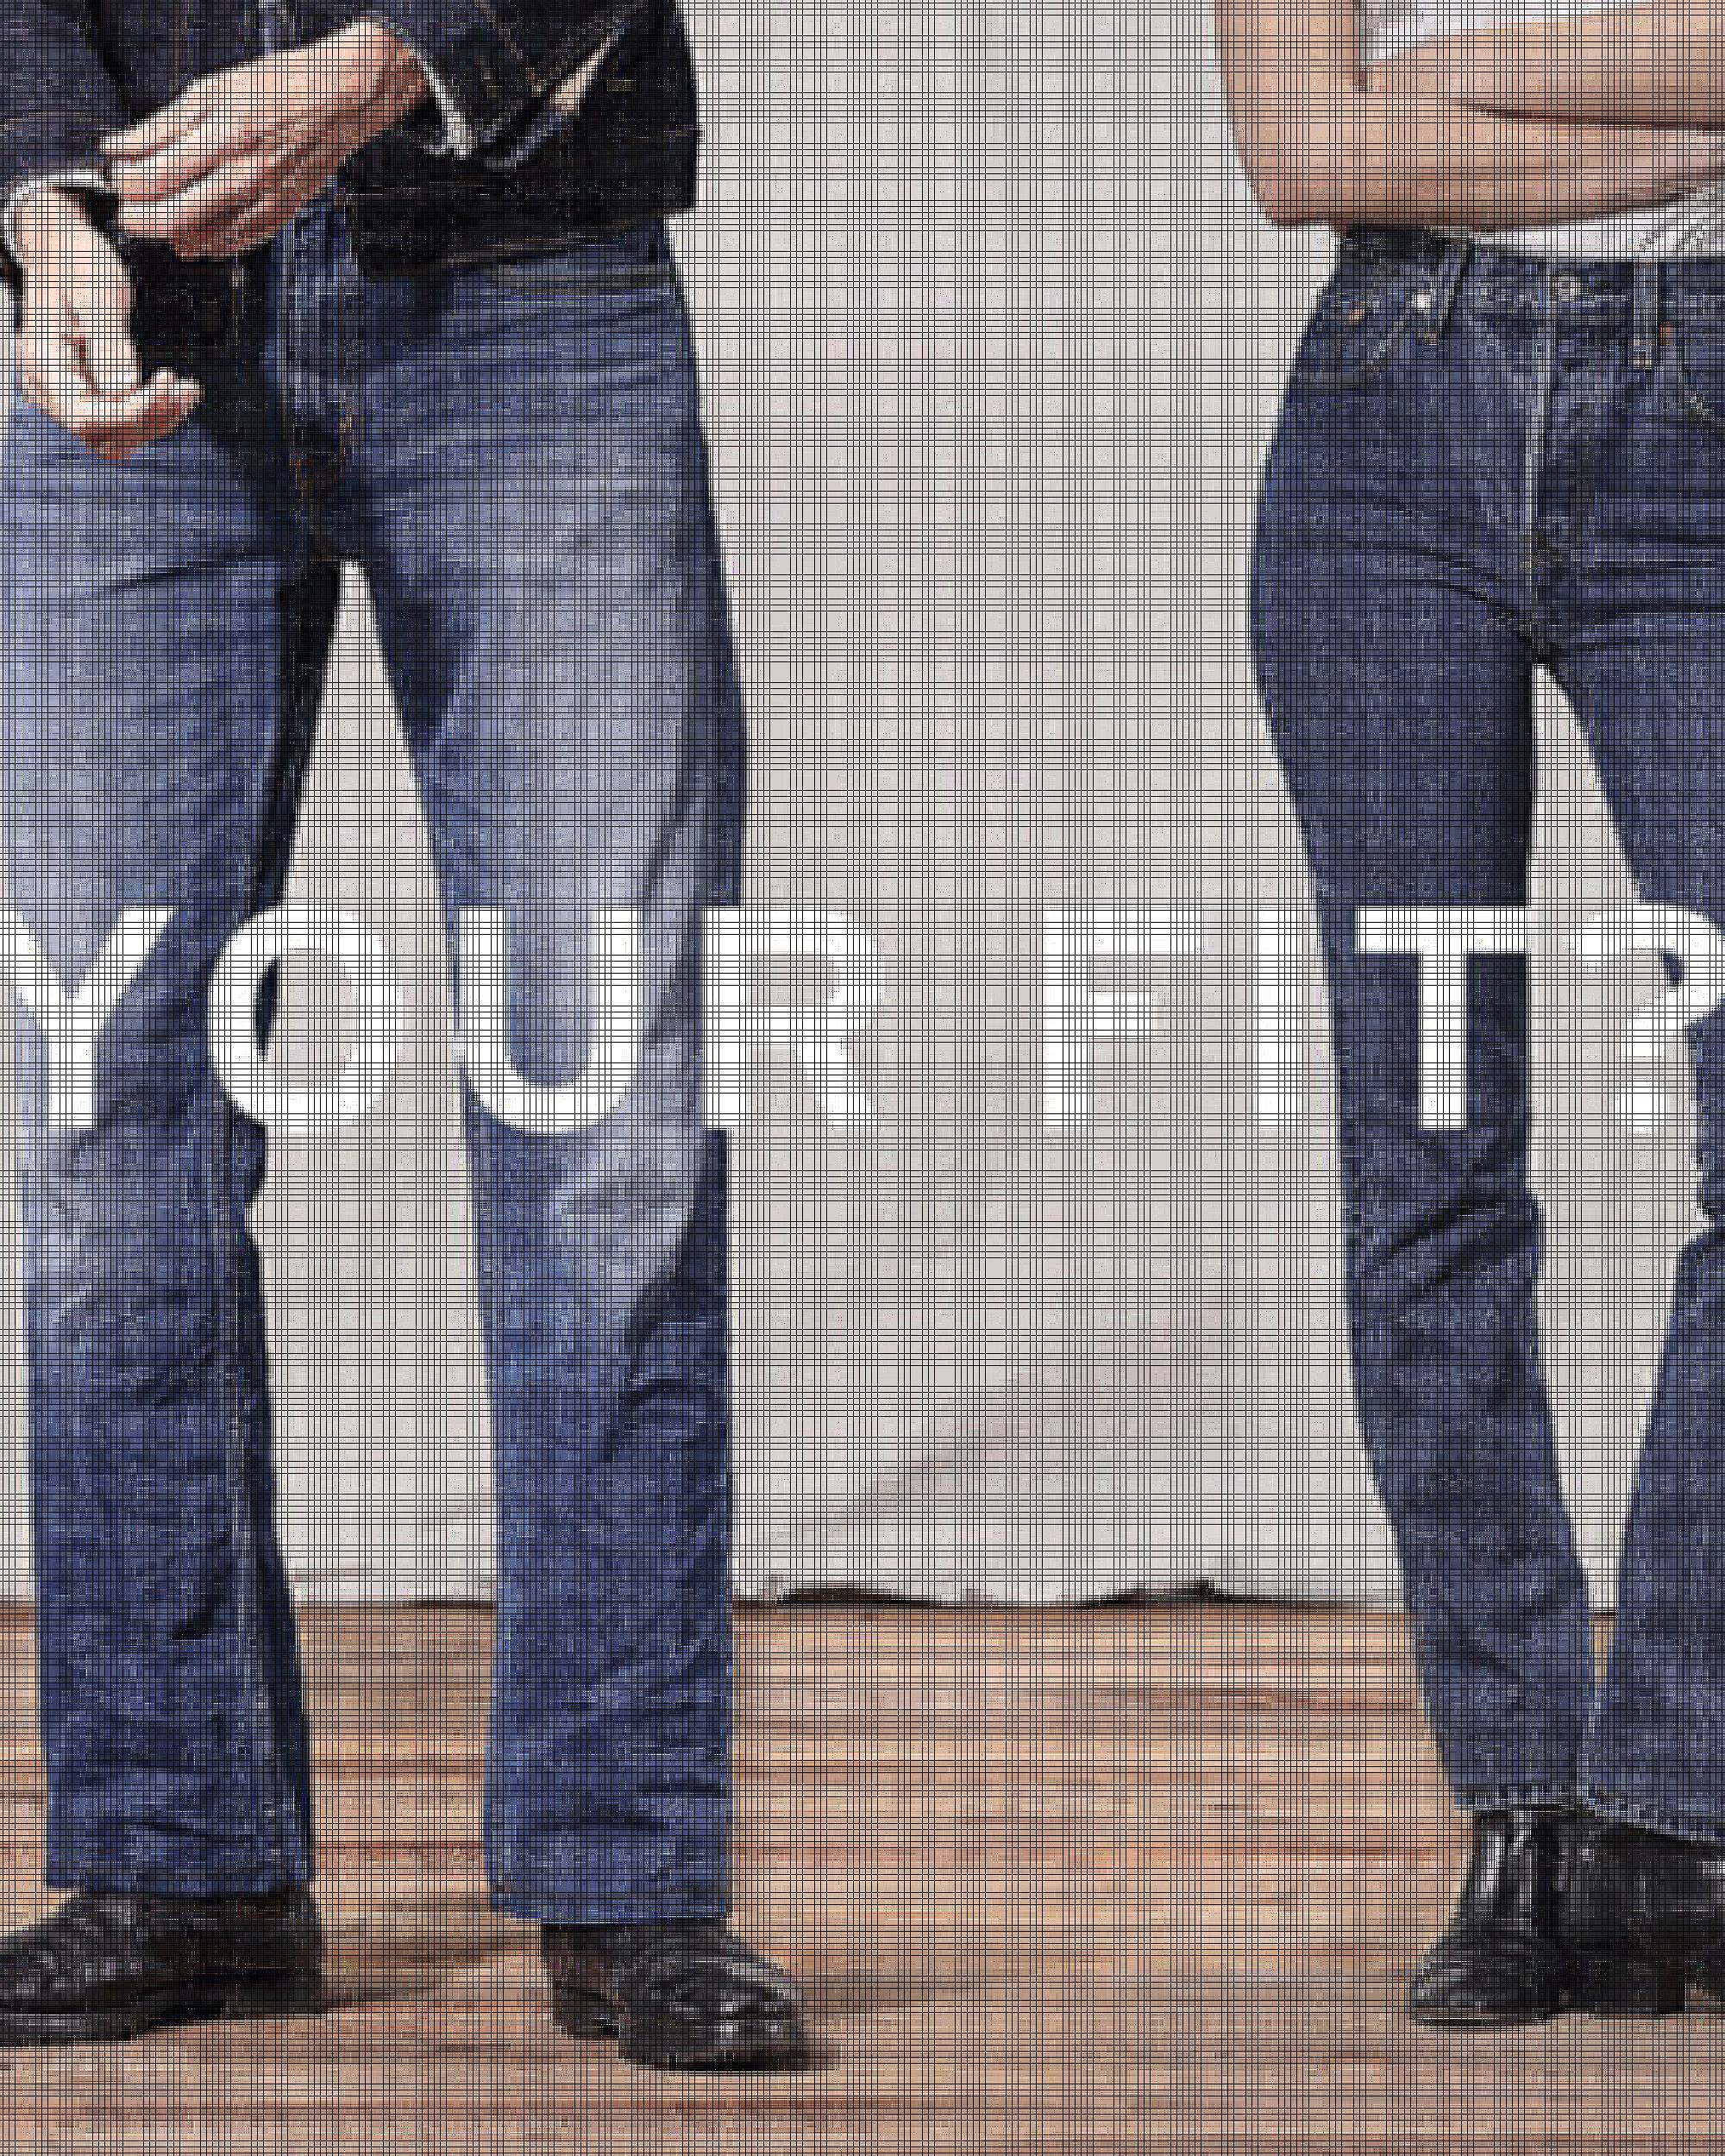 THE NEW LEVI’S® JEANS GUIDE IS HERE | Off the Cuff